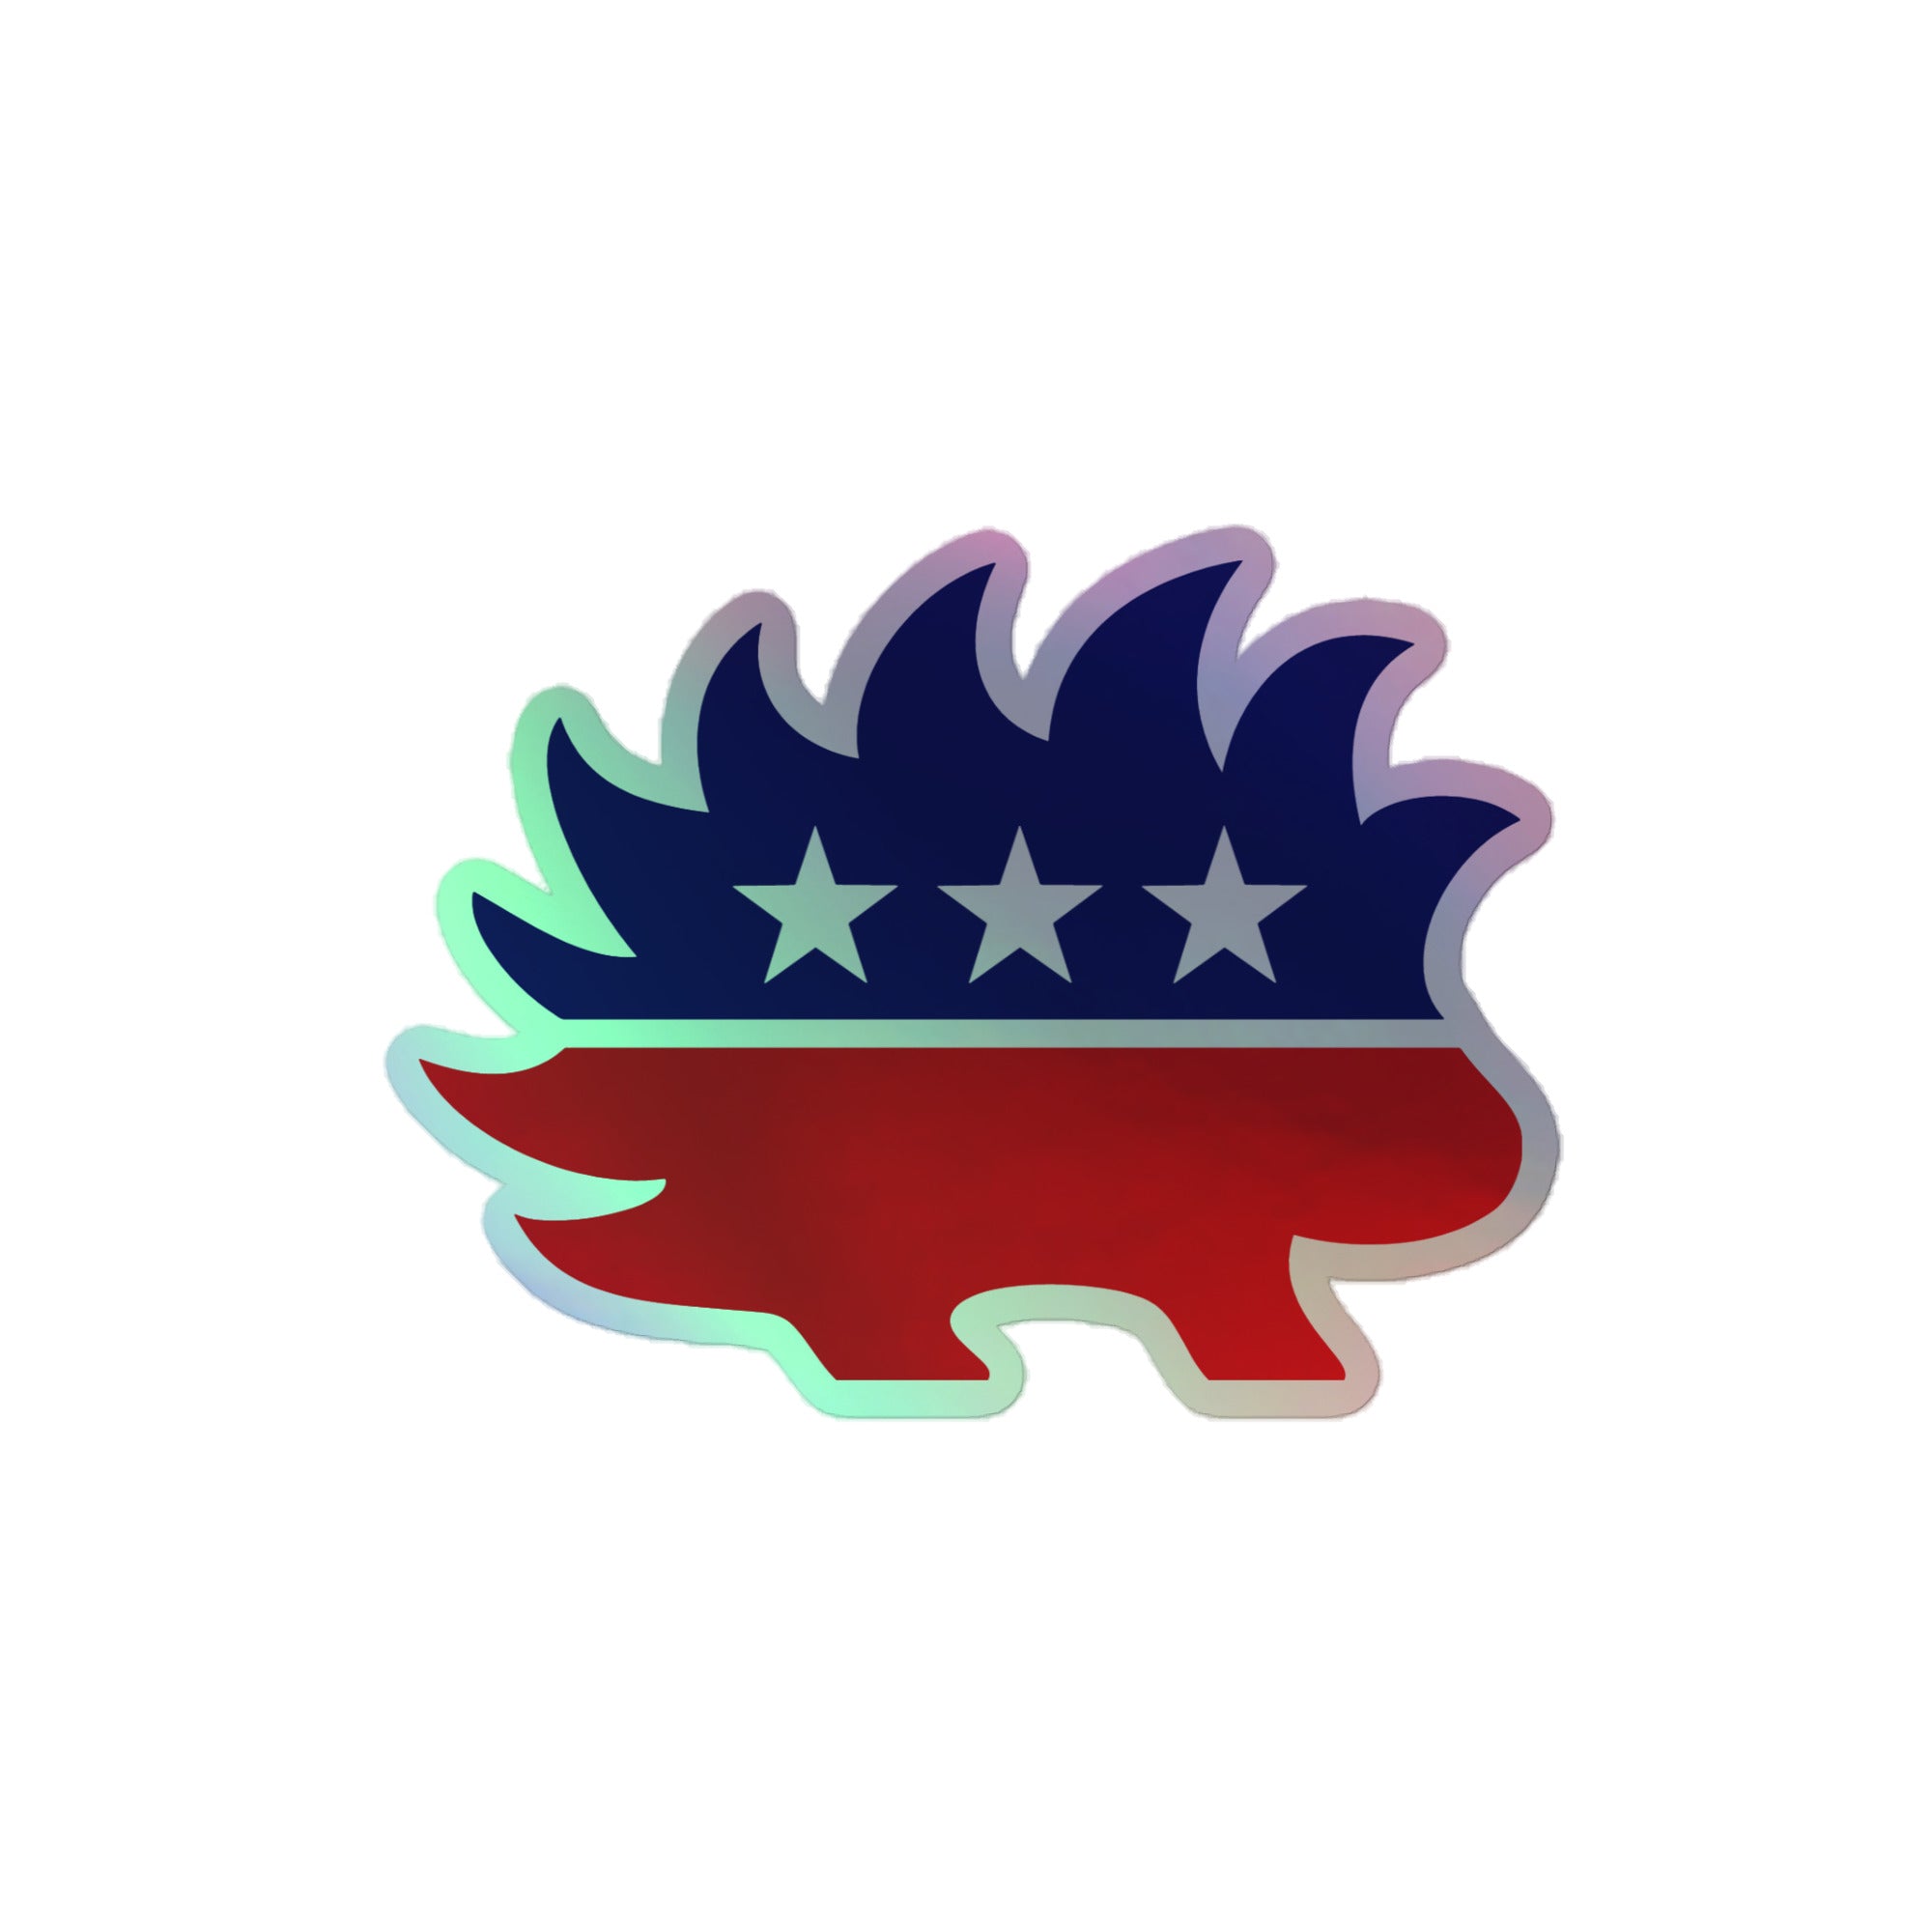 Porcupine Libertarian Mascot Holographic Stickers